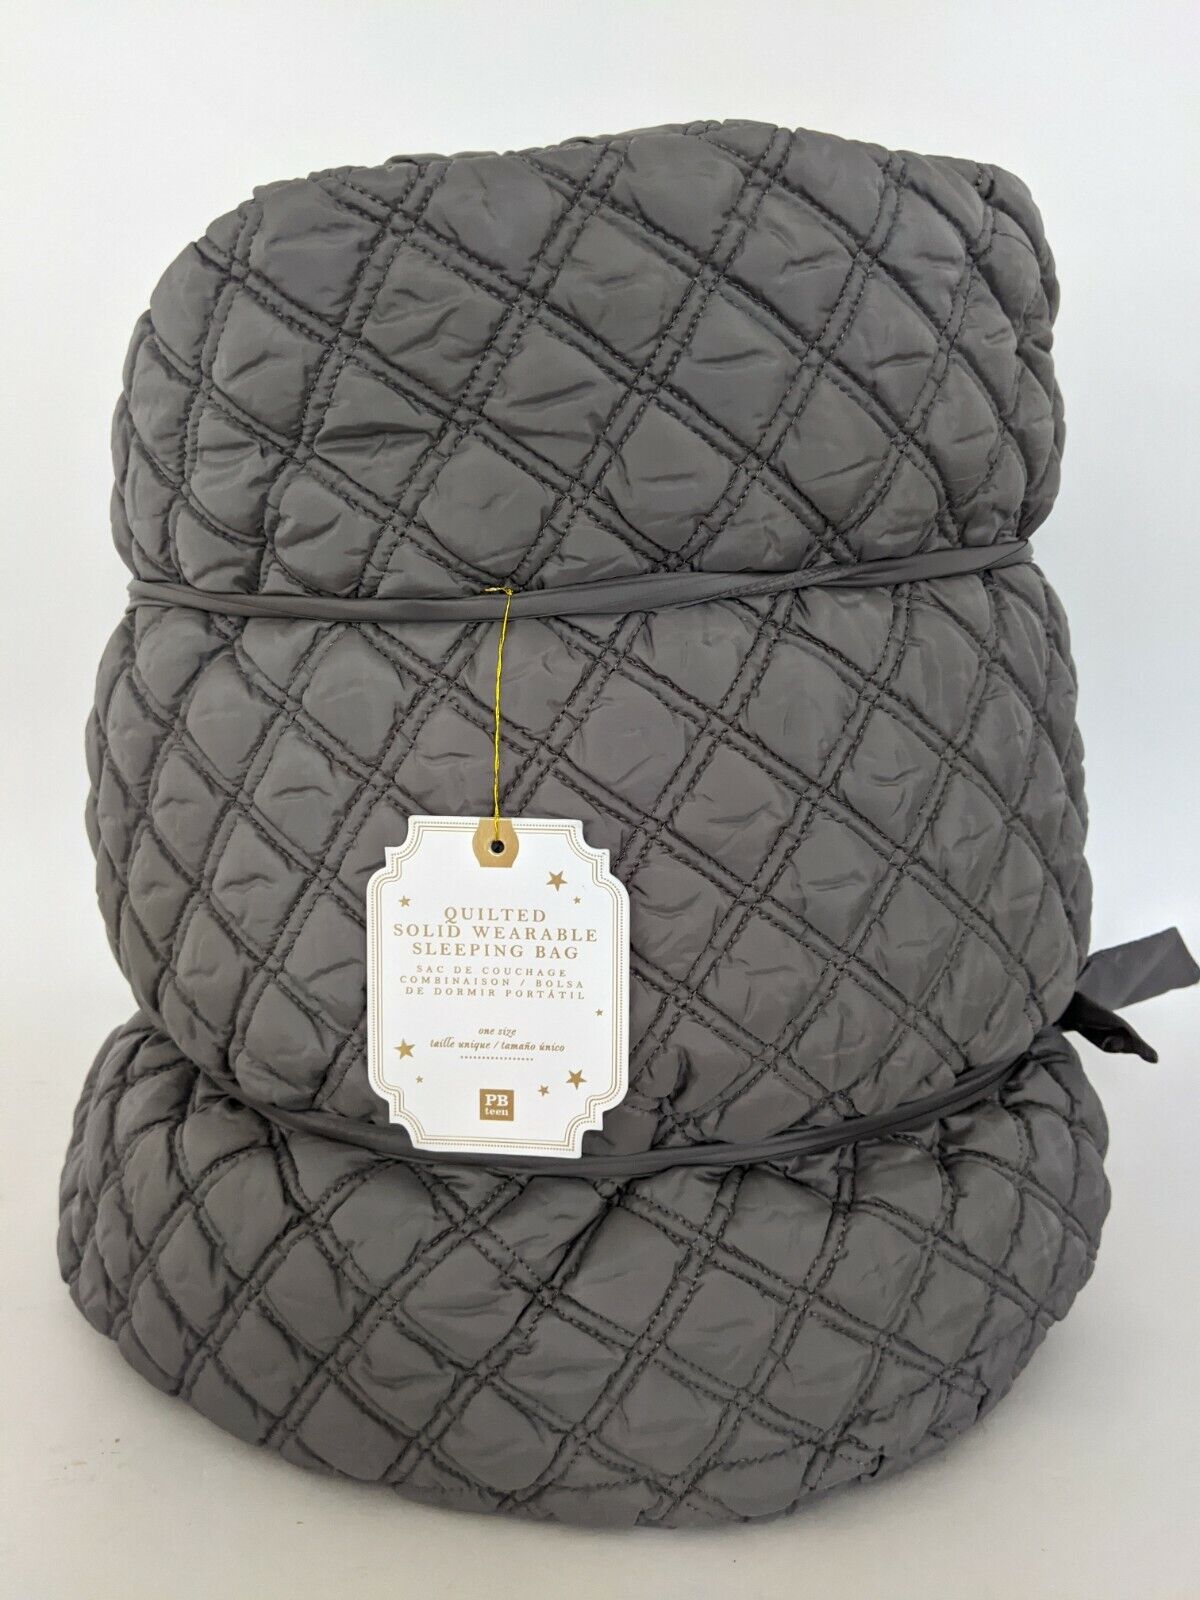 Pottery Barn PB Teen or Kids Fixed price for sale wearable bag sleeping quilted Long-awaited gray